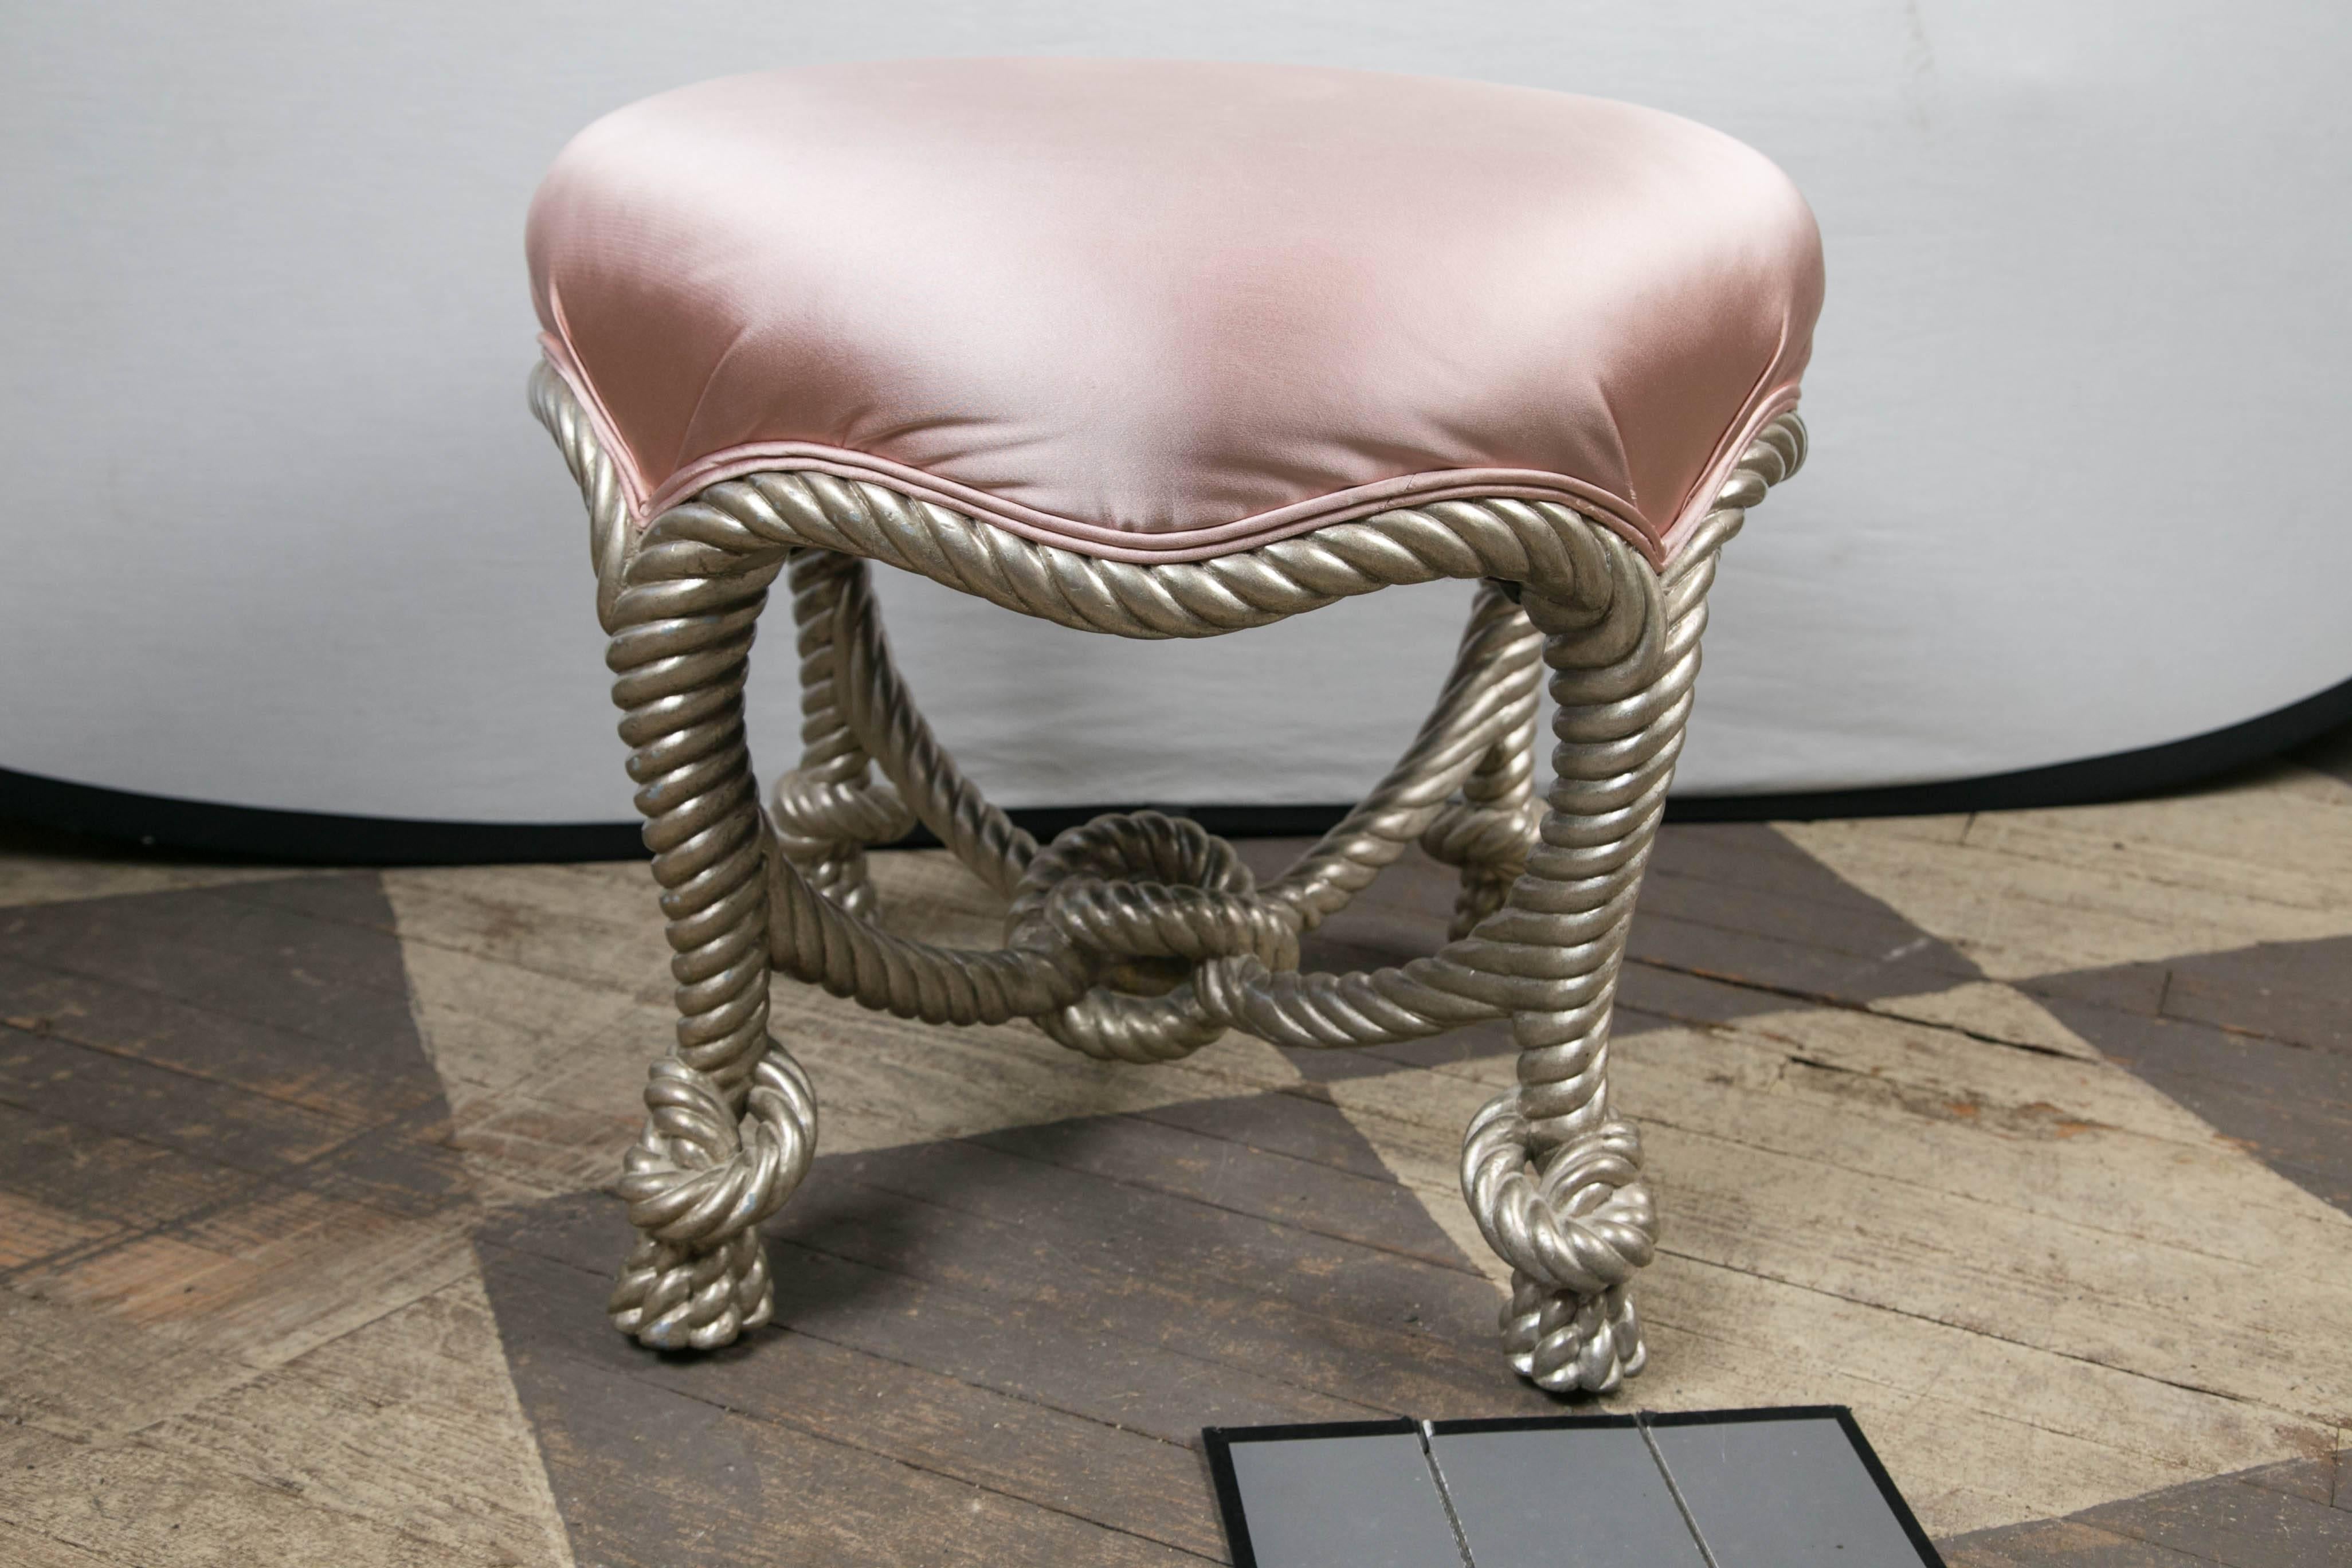 Carved and silvered wood stools with knotted cross stretcher and legs.
Now upholstered in pink satin.
Shipping charges are approximates.